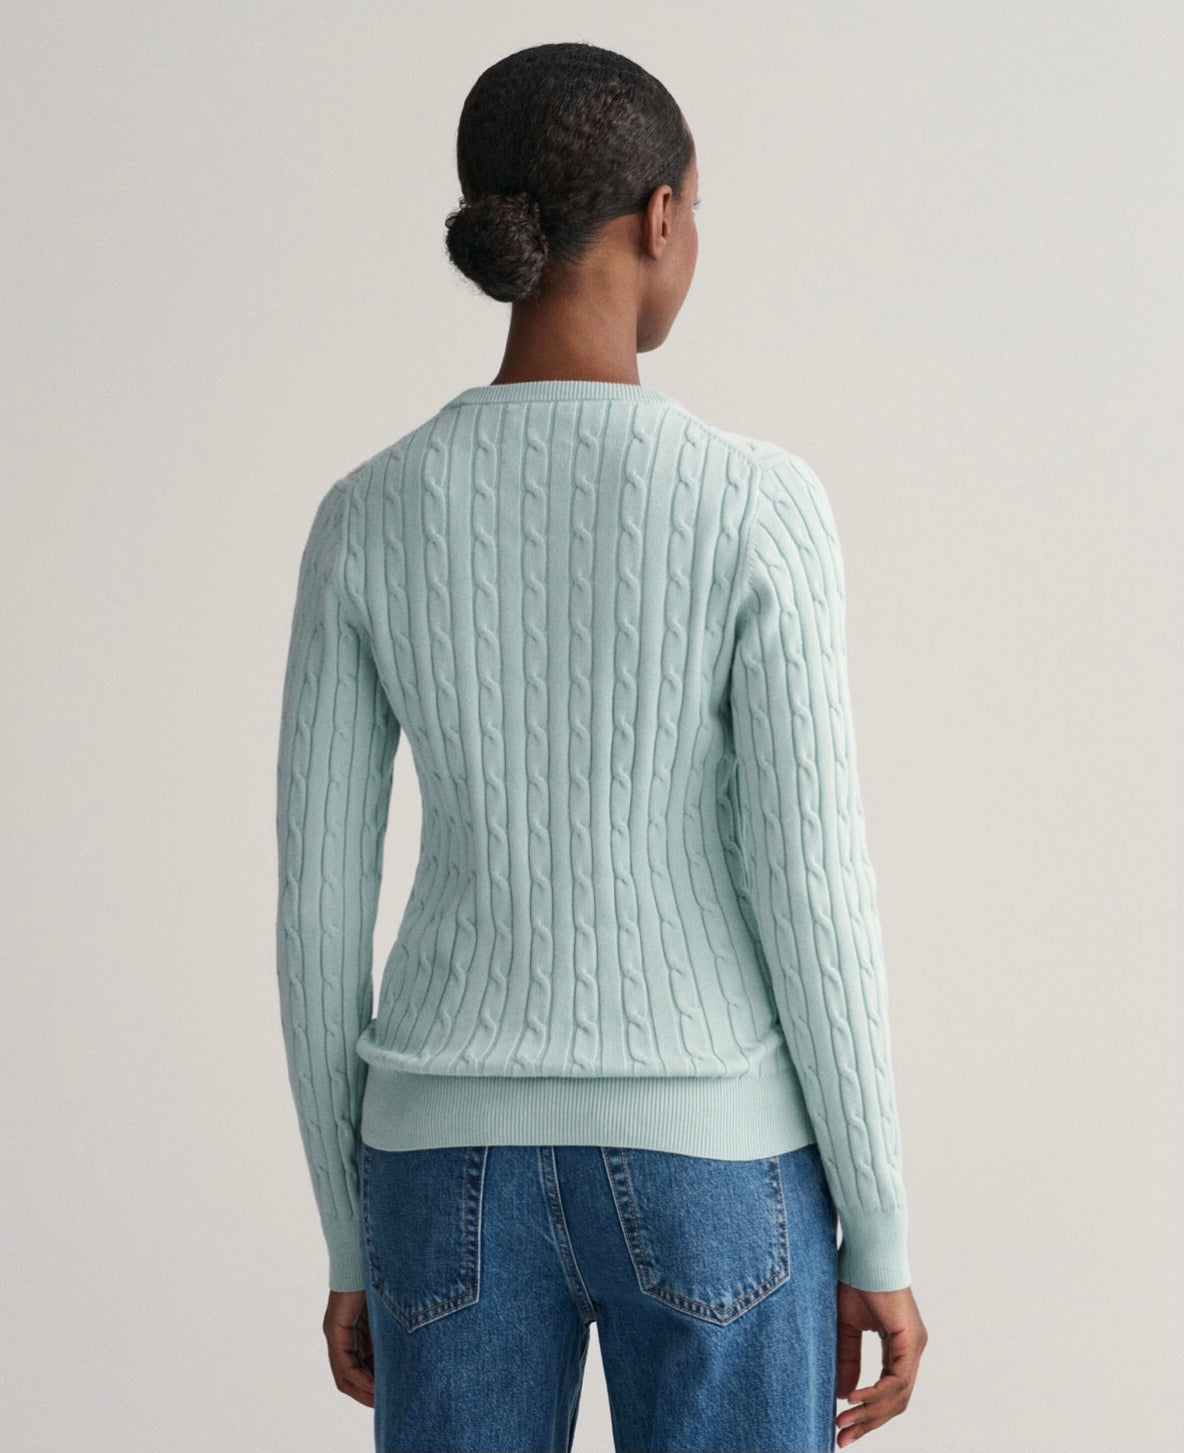 Dusty turquoise cable knit sweater